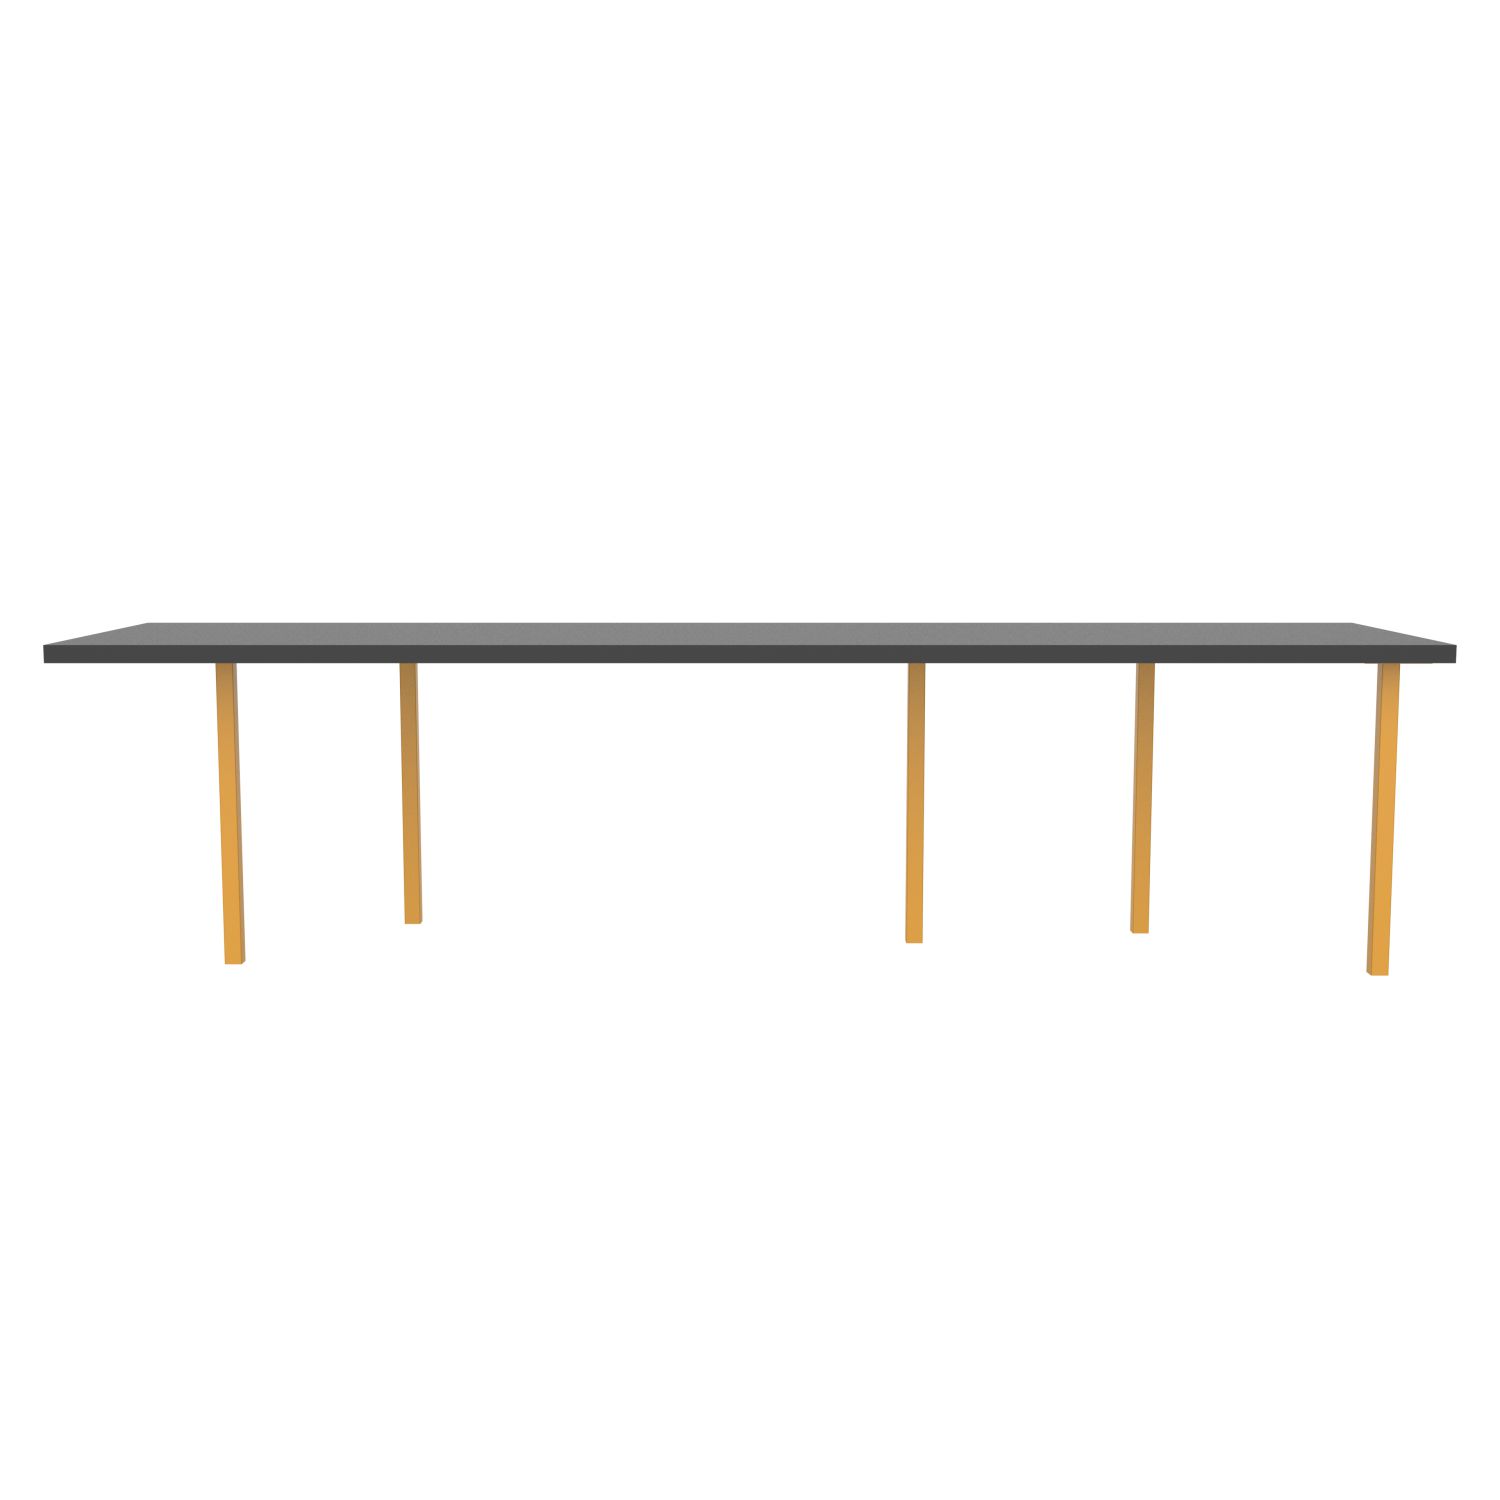 lensvelt bbrand table five fixed heigt 80x310 hpl black 50 mm price level 1 yellow ral1004